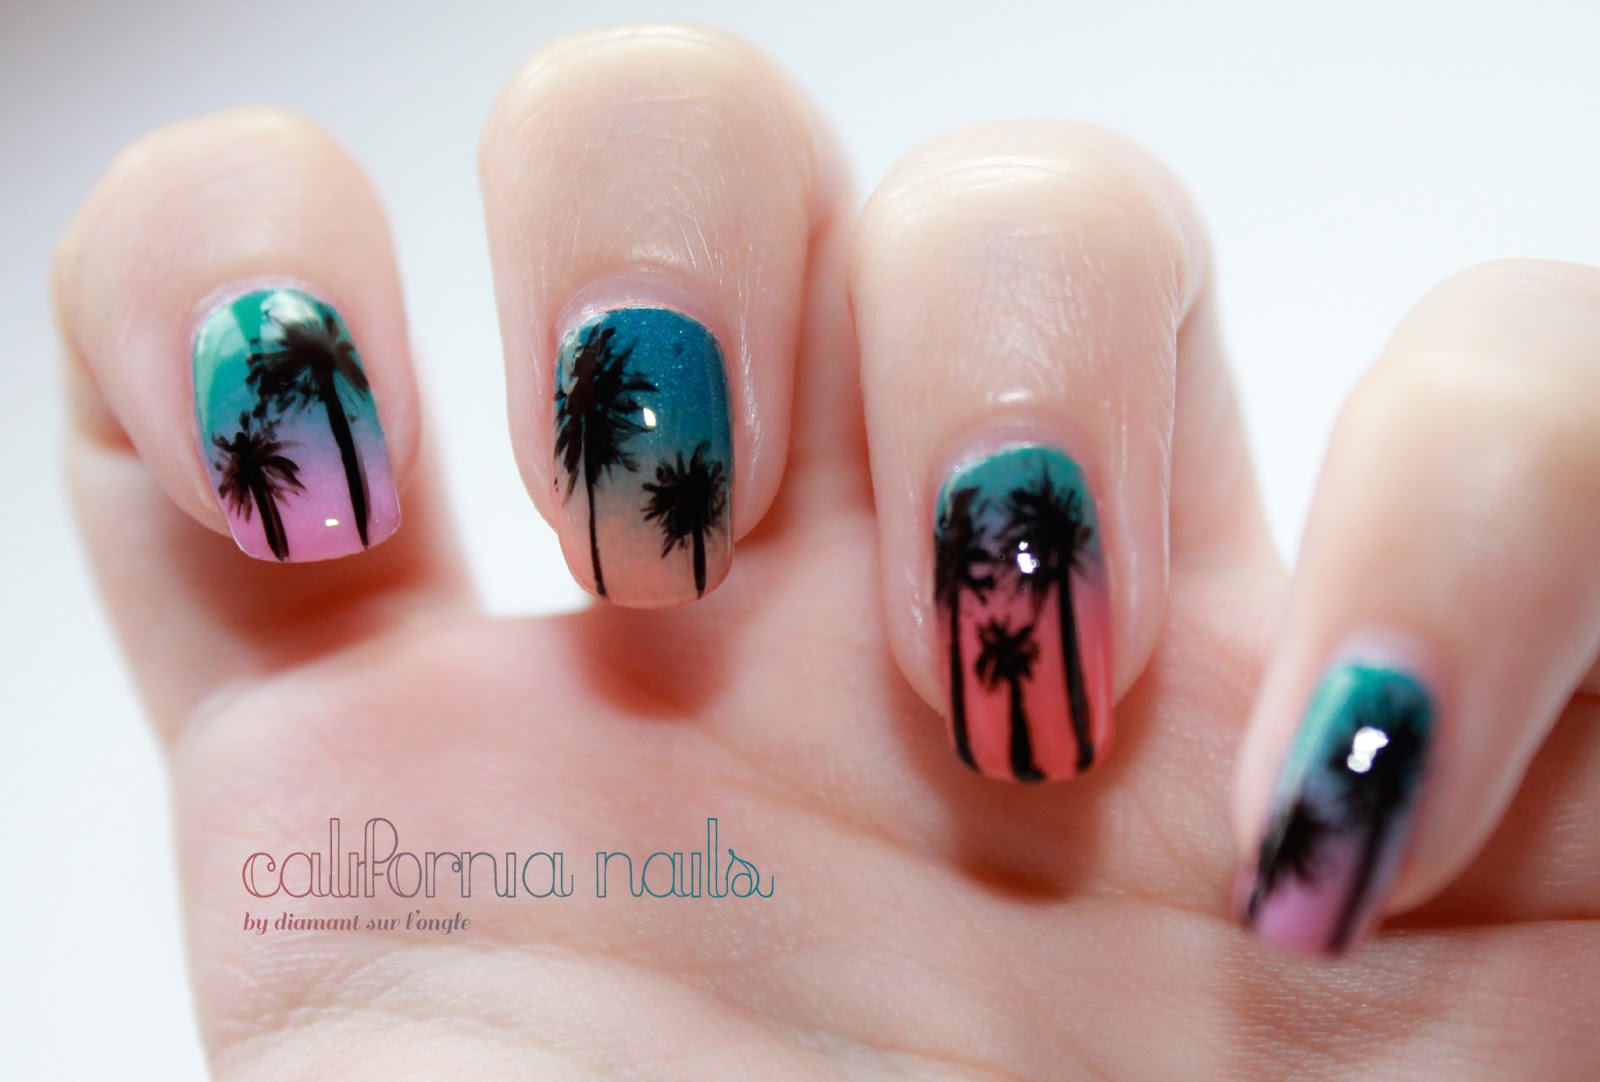 9. Nail Designer Commission in Southern California - wide 11